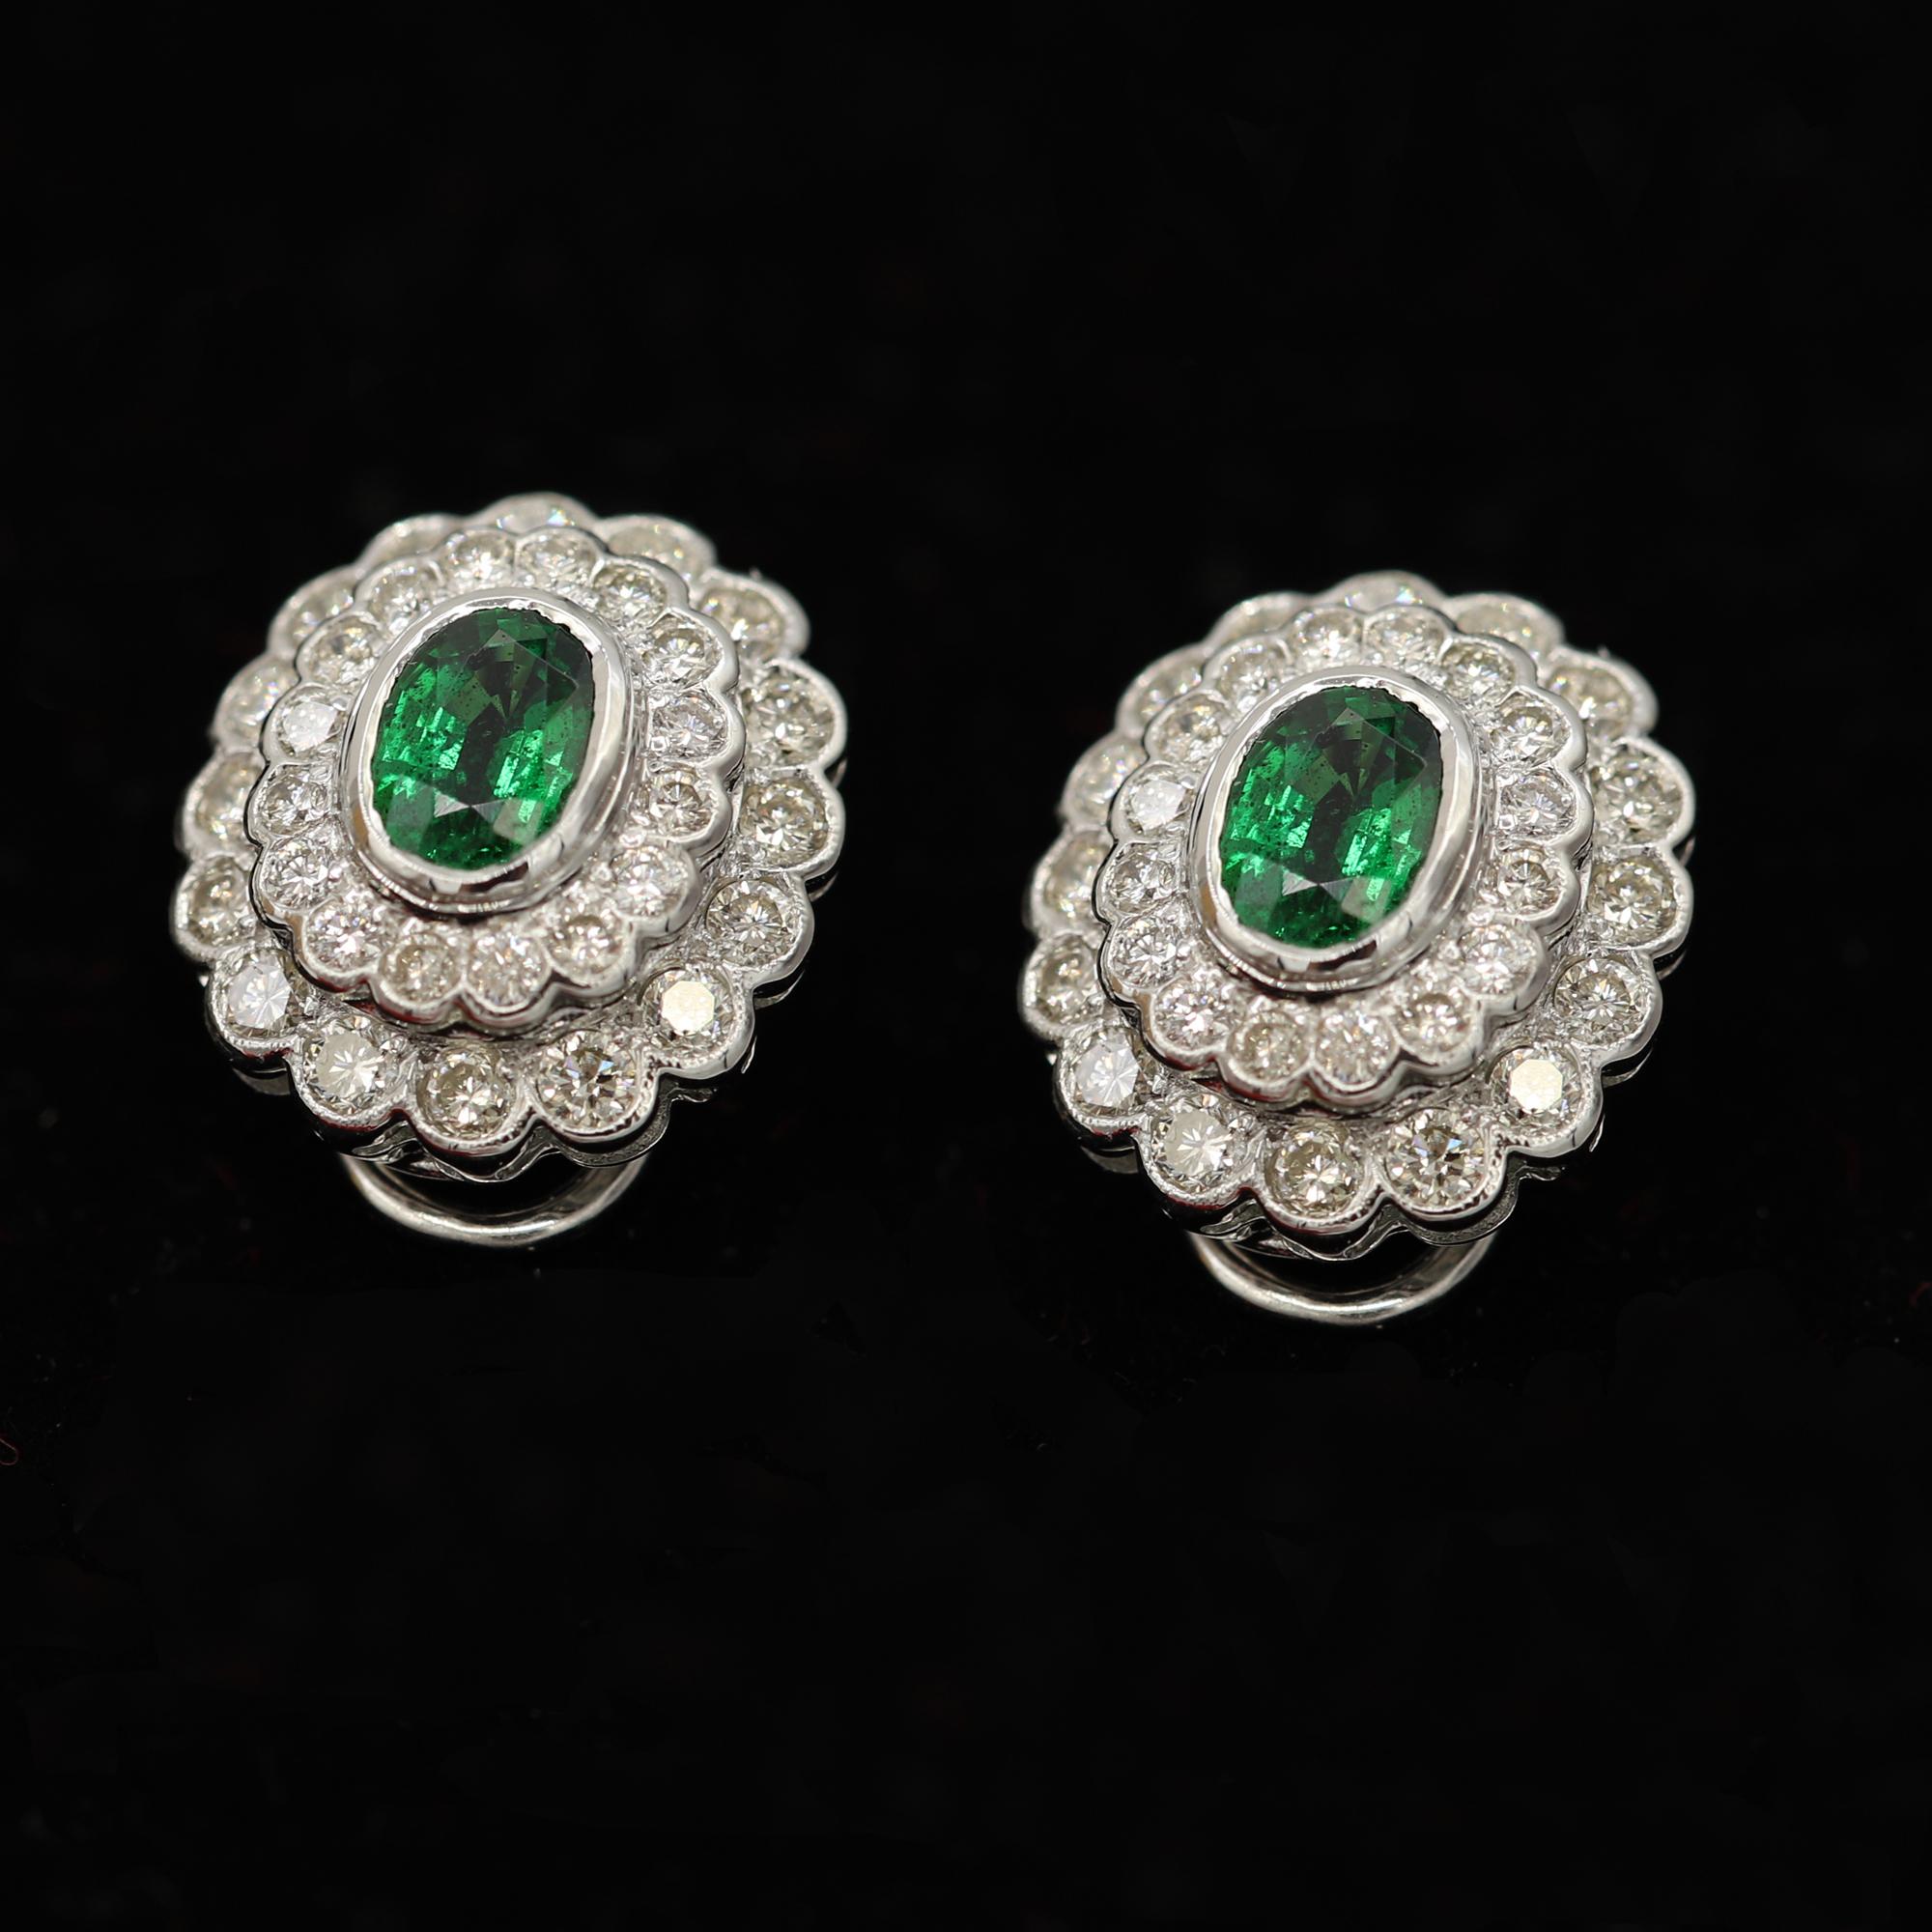 Brilliant Diamond and Tsavorite Earrings, Oval Shape Tsavorite size 7 x 5mm, 2.10 carat.
overall earring size 16 x 14 mm (about 3/4' x 1/2' inches). Brilliant Round Diamonds Total 1.83 carat GH-SI.
back type is omega post. please note: the post is